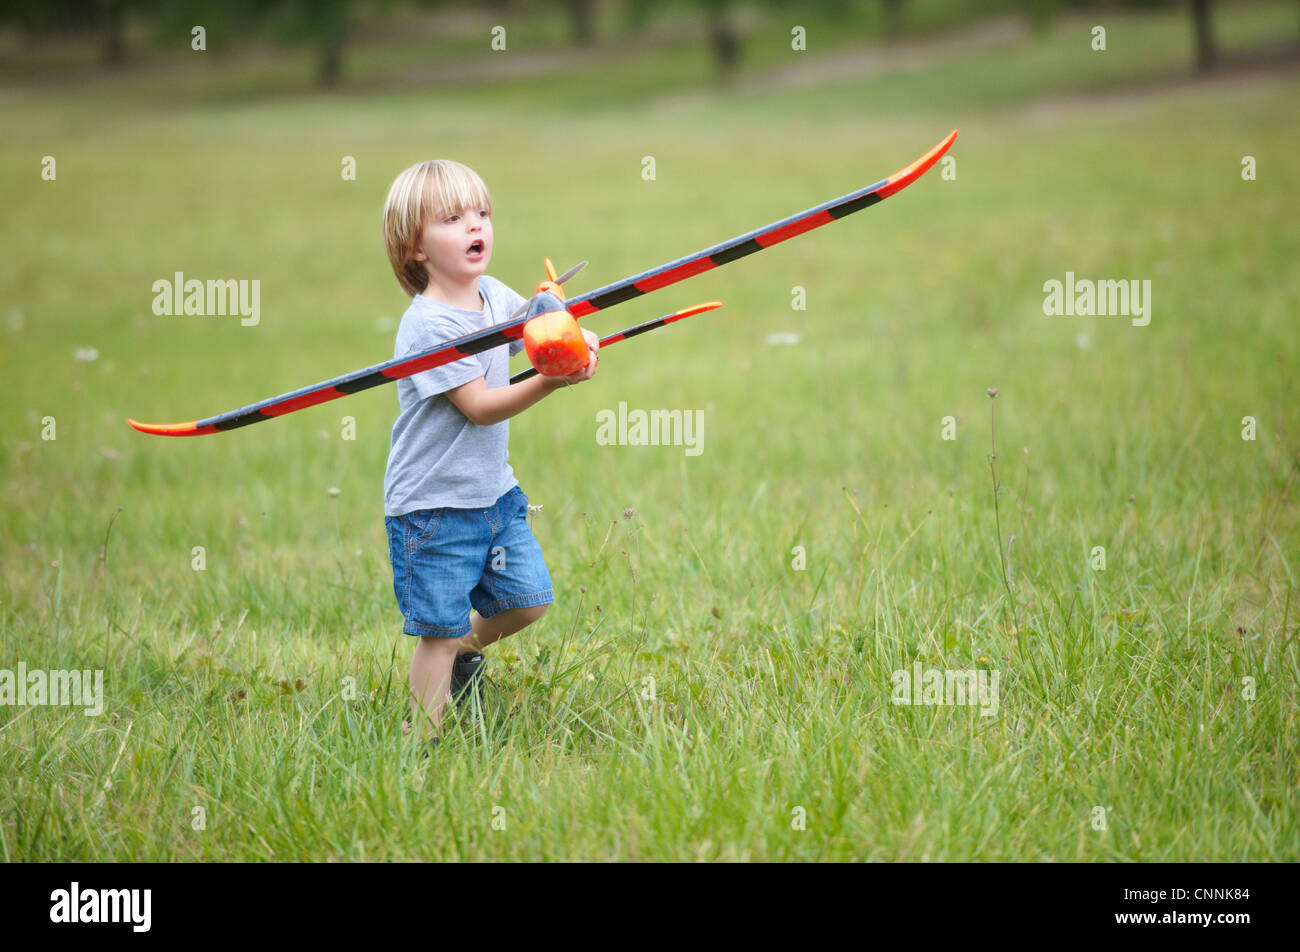 Boy Playing with toy airplane outdoors Banque D'Images